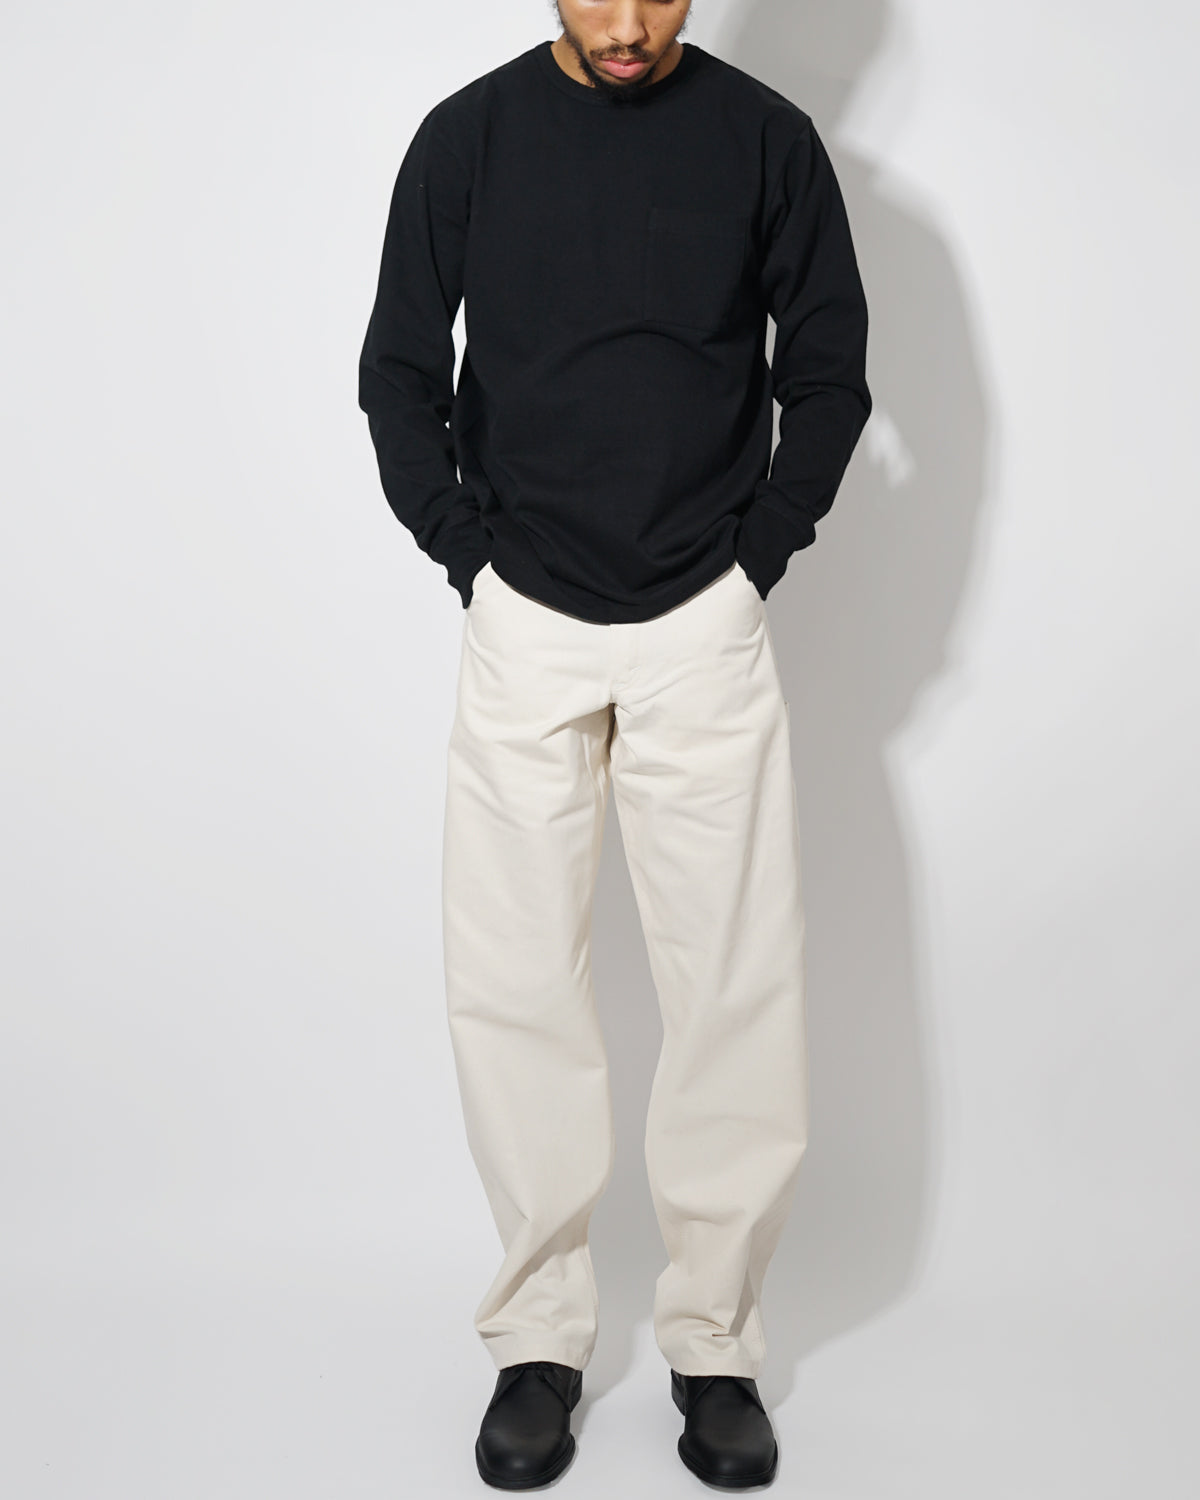 Work Pants (Stan Ray, Dickies, Carhartt)  Pants outfit work, White painters  pants, Pants outfit men